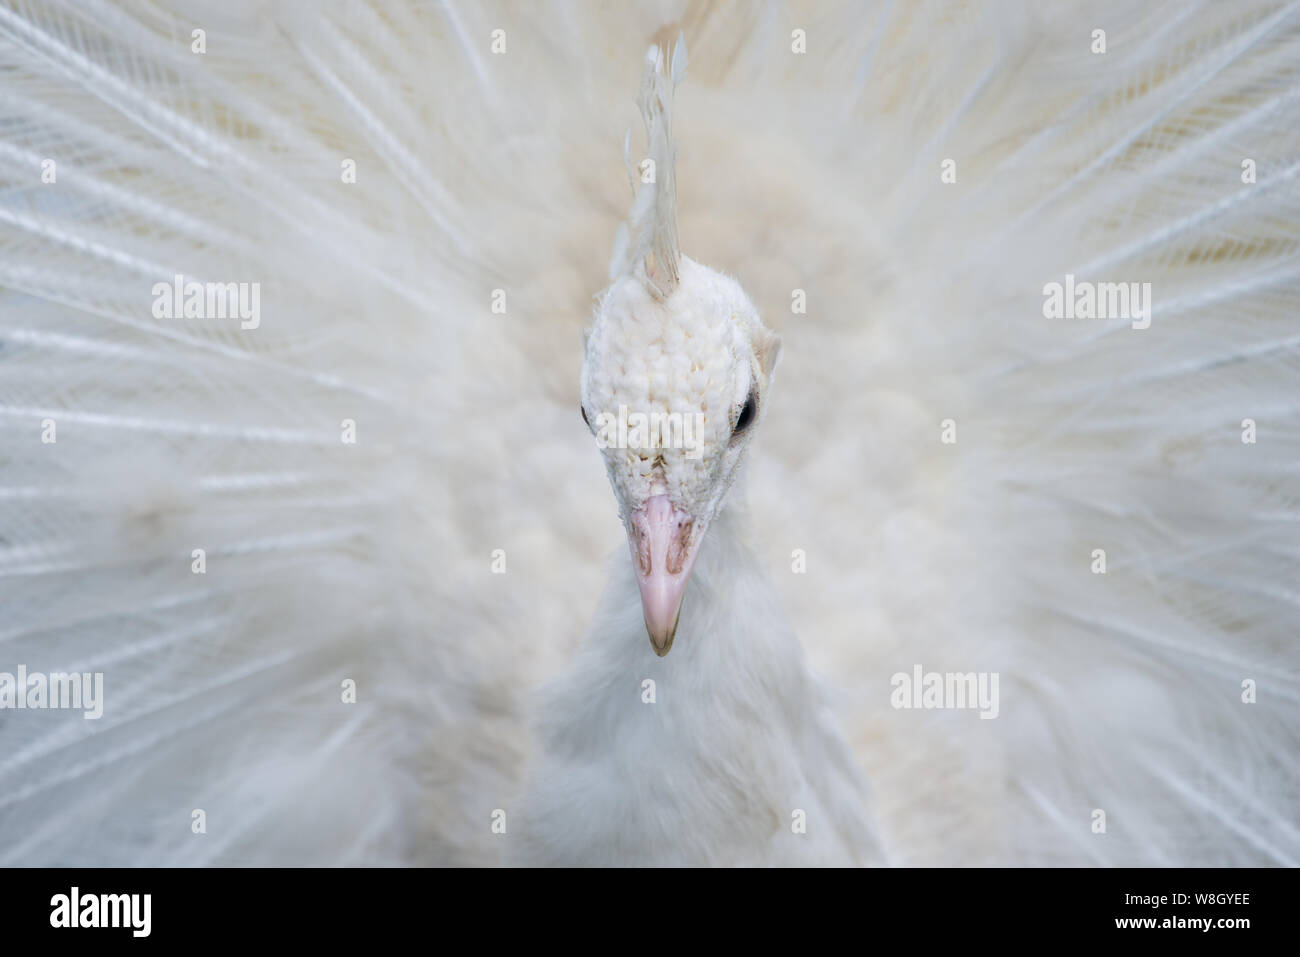 Portrait of a white peacock with open feathers Stock Photo